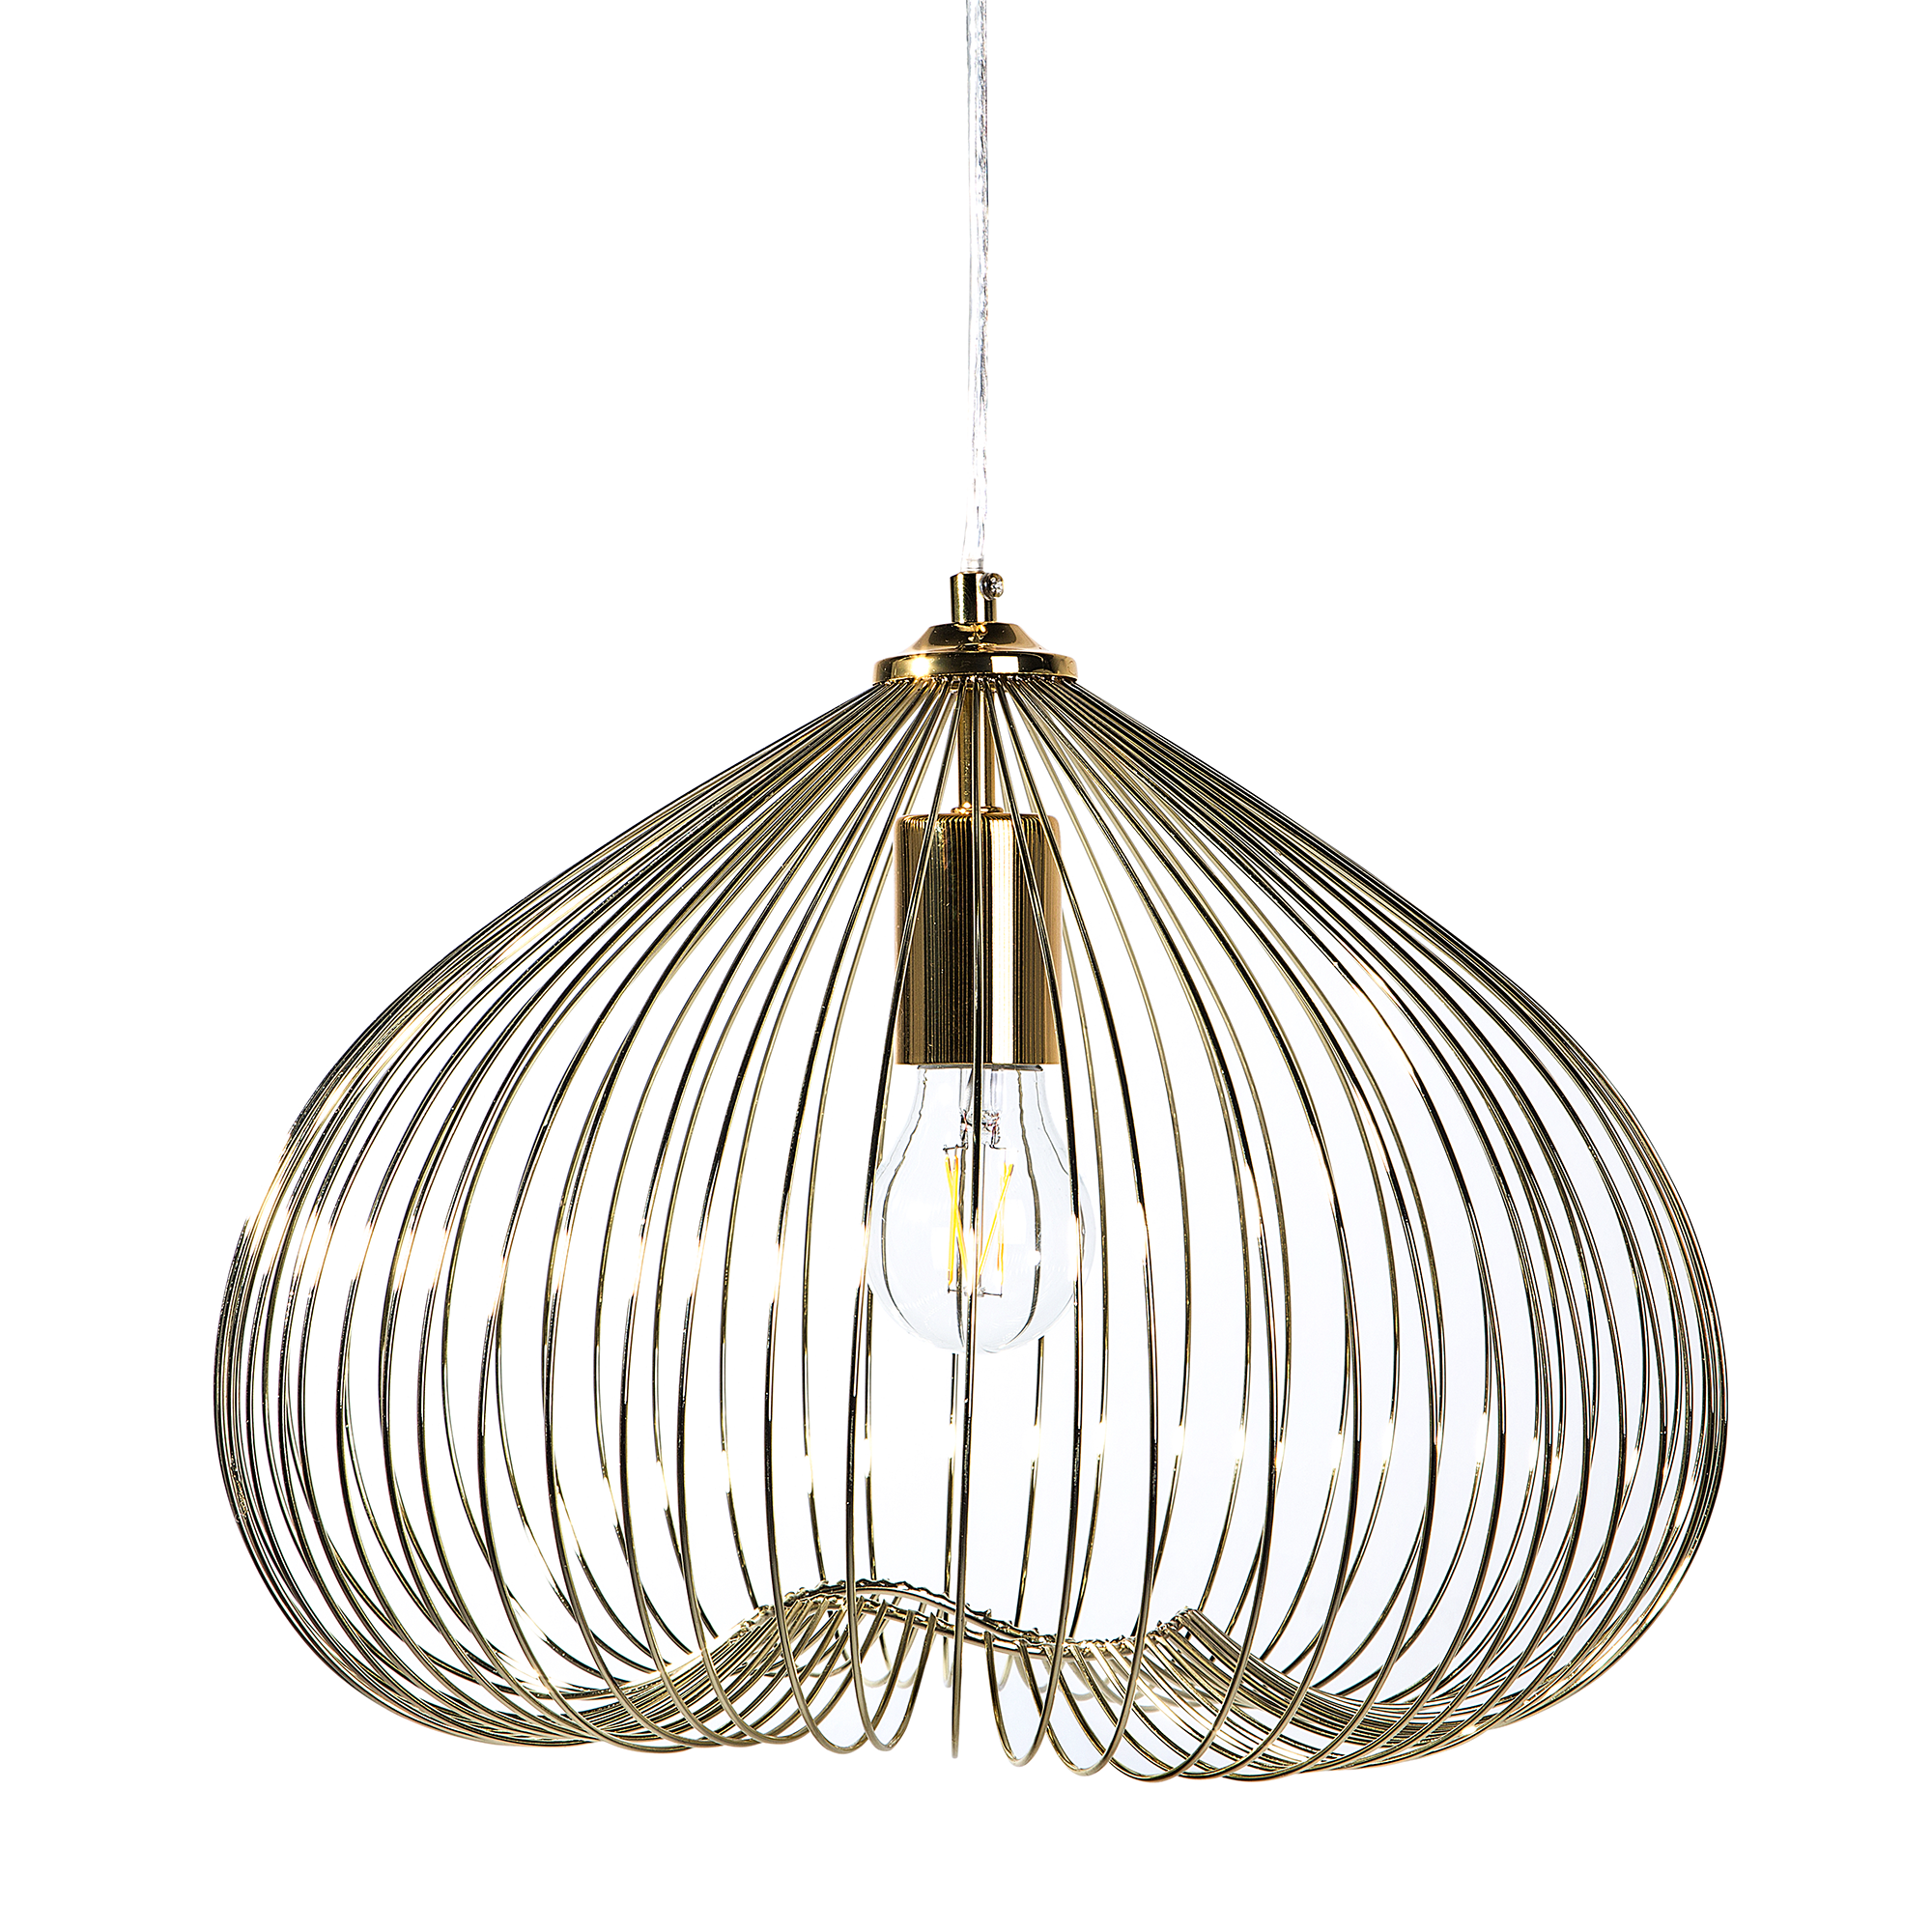 Beliani 1-Light Pendant Ceiling Gold Metal Shade Cage Wire Industrial